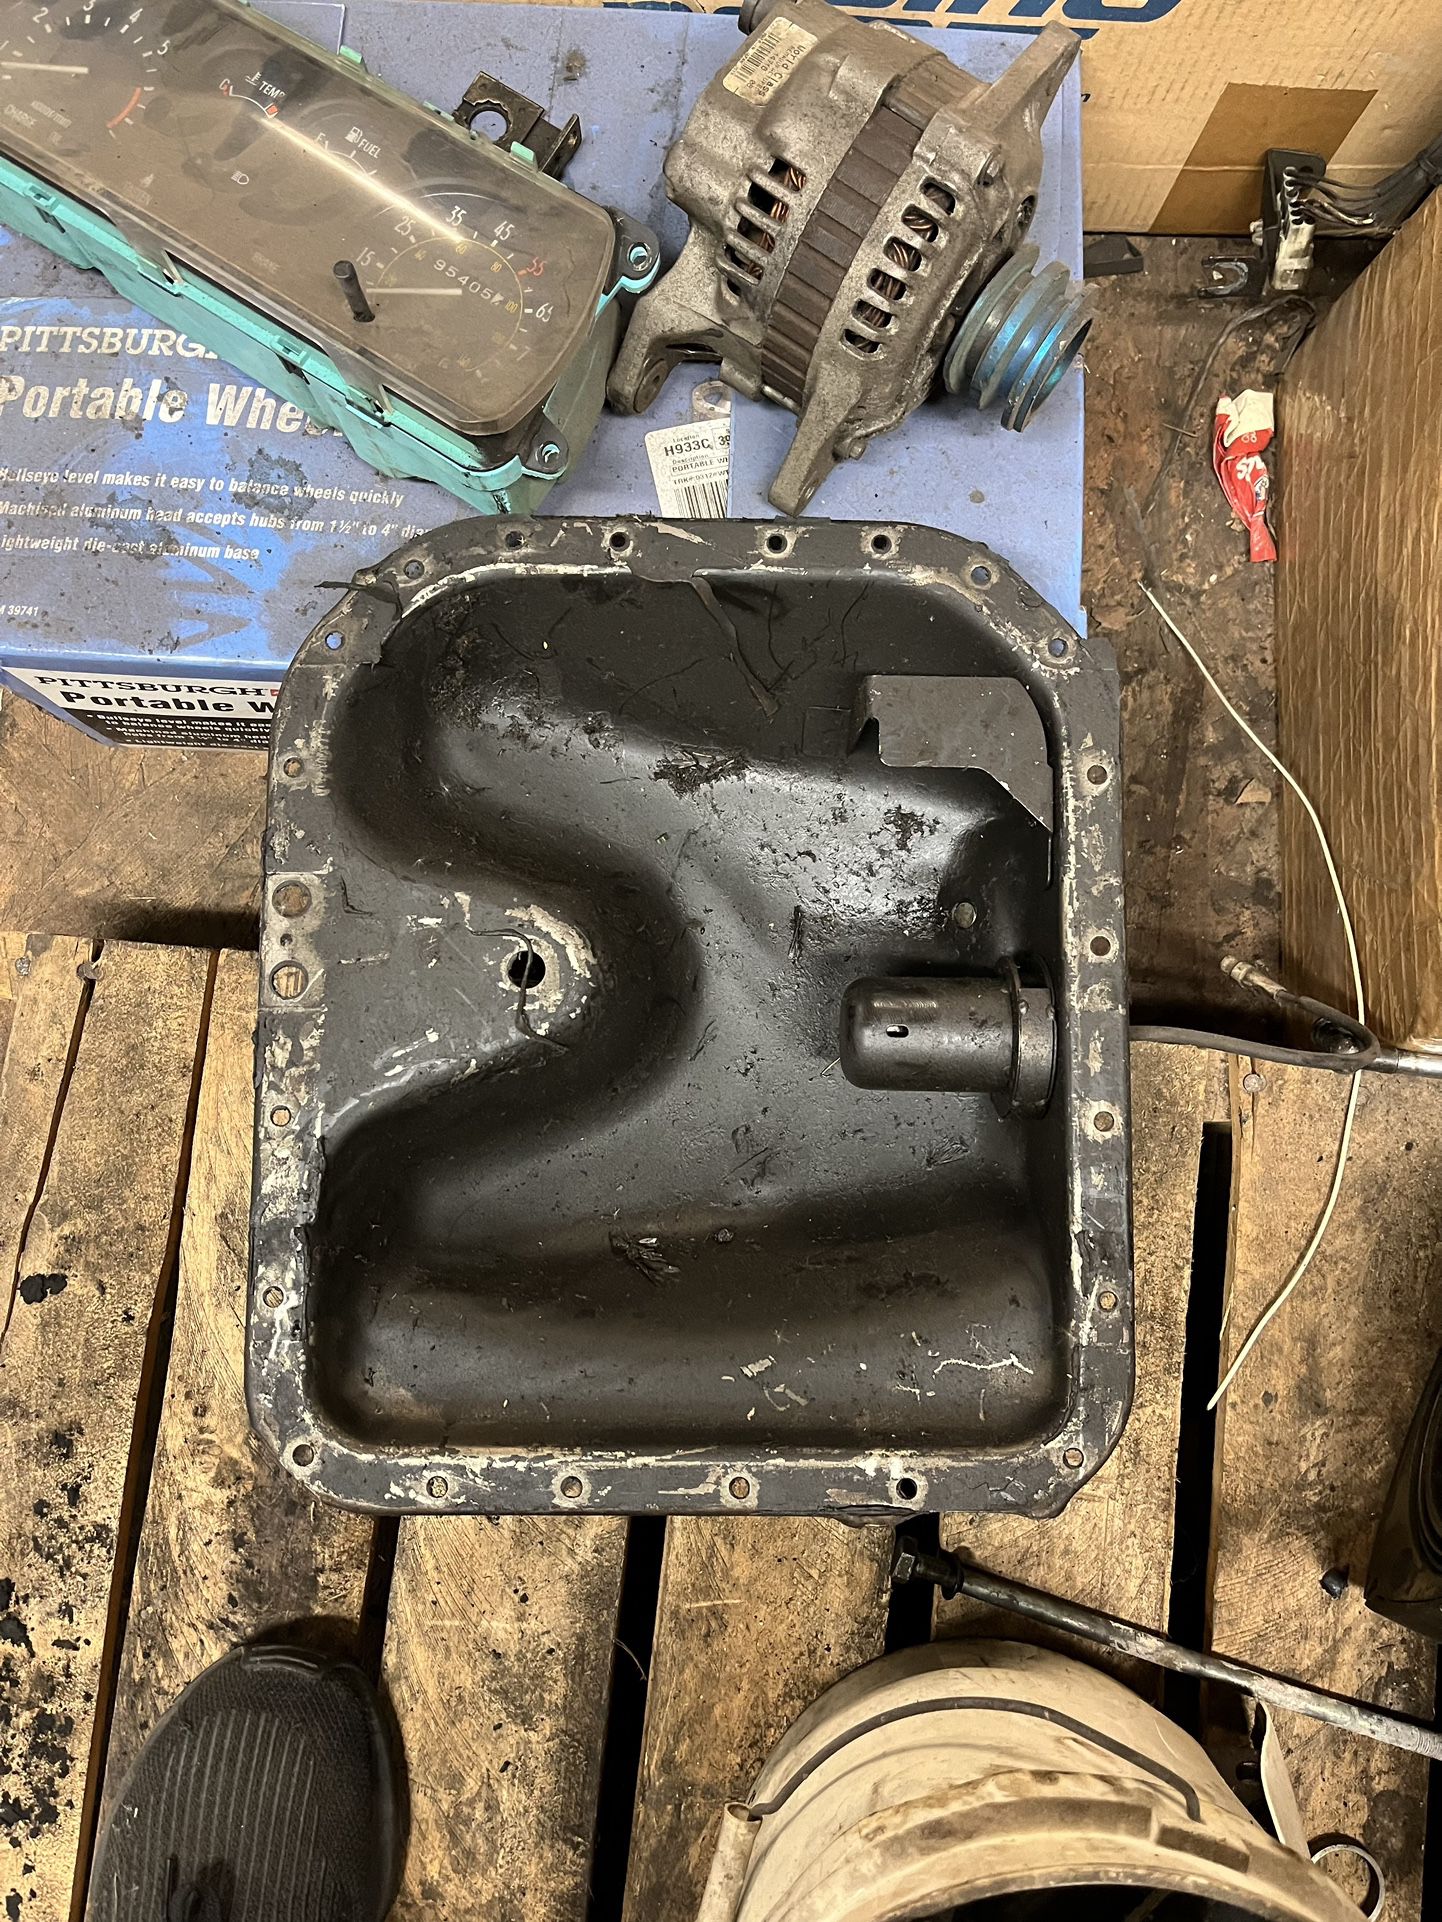 1987 To 1991 Mazda RX7 FC Oil Pan 